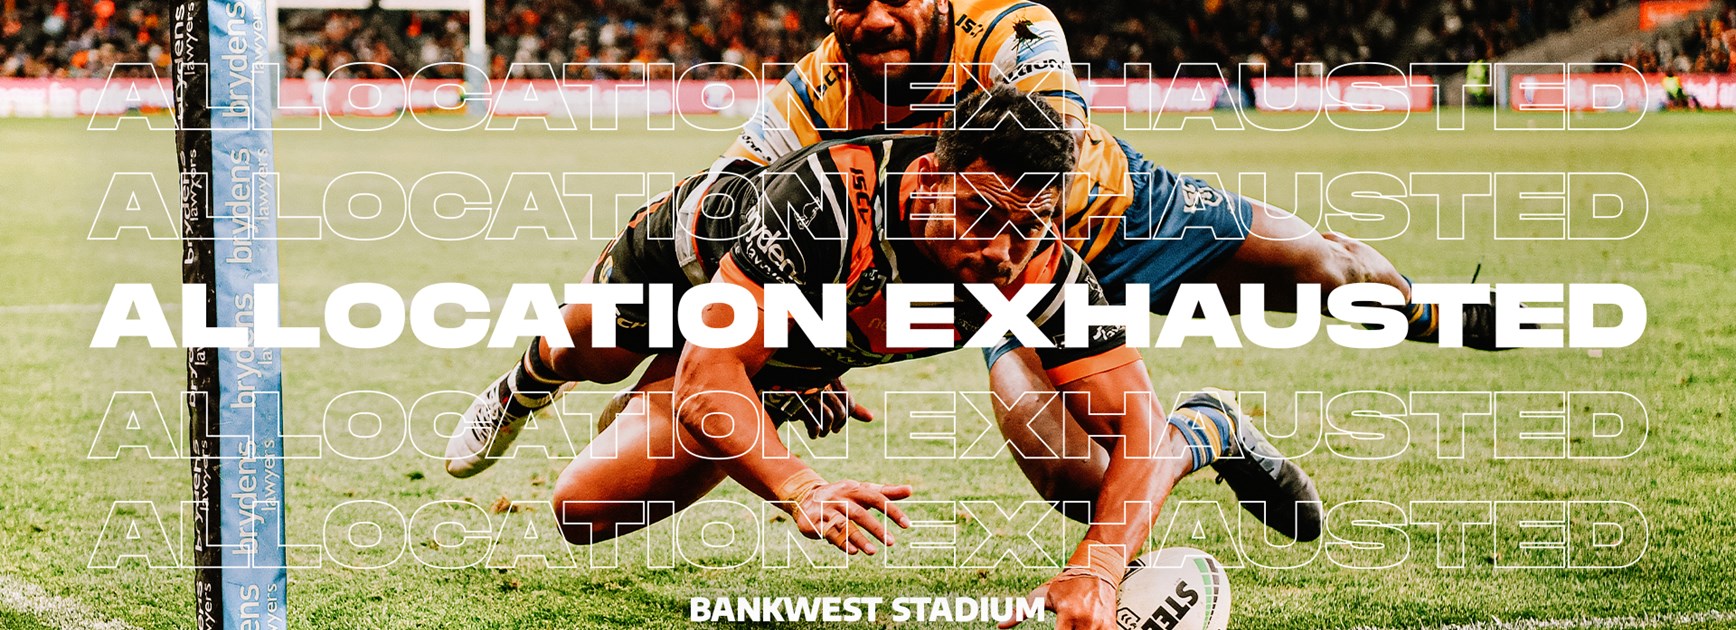 Ticket allocation exhausted for Round 20 clash